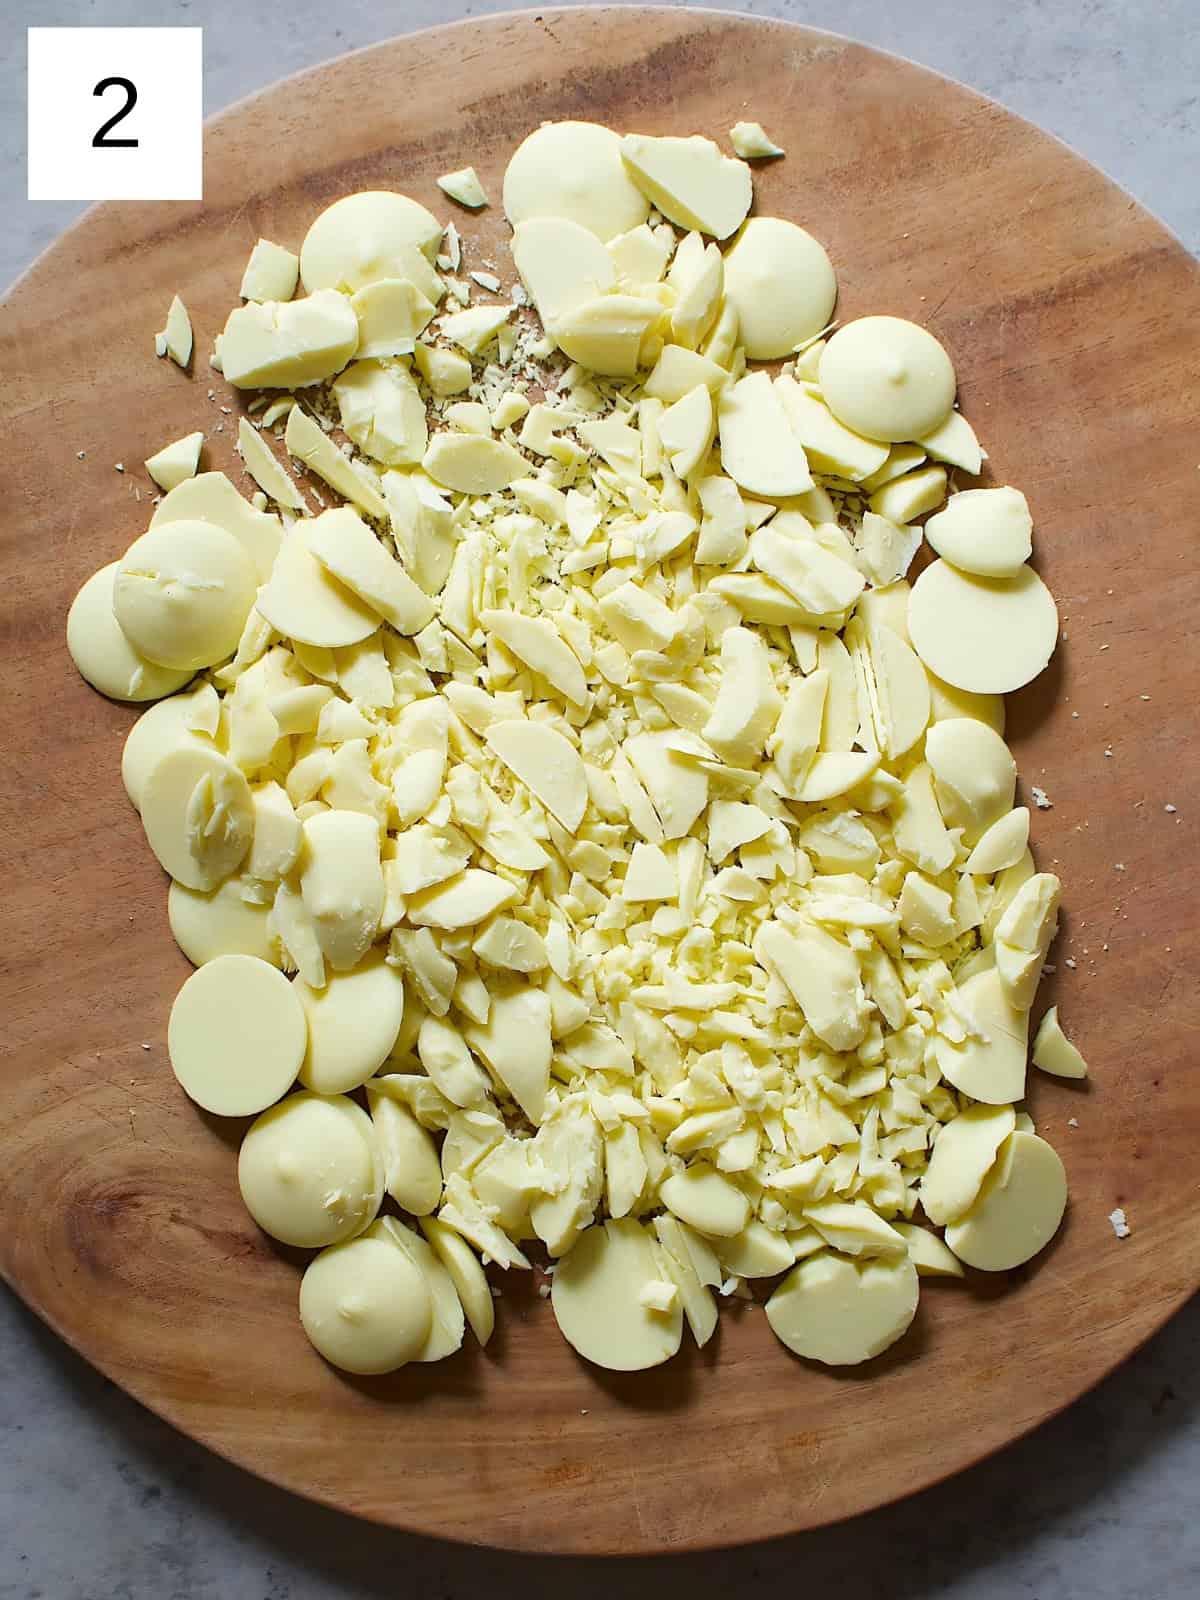 White chocolates being diced on a wooden board.